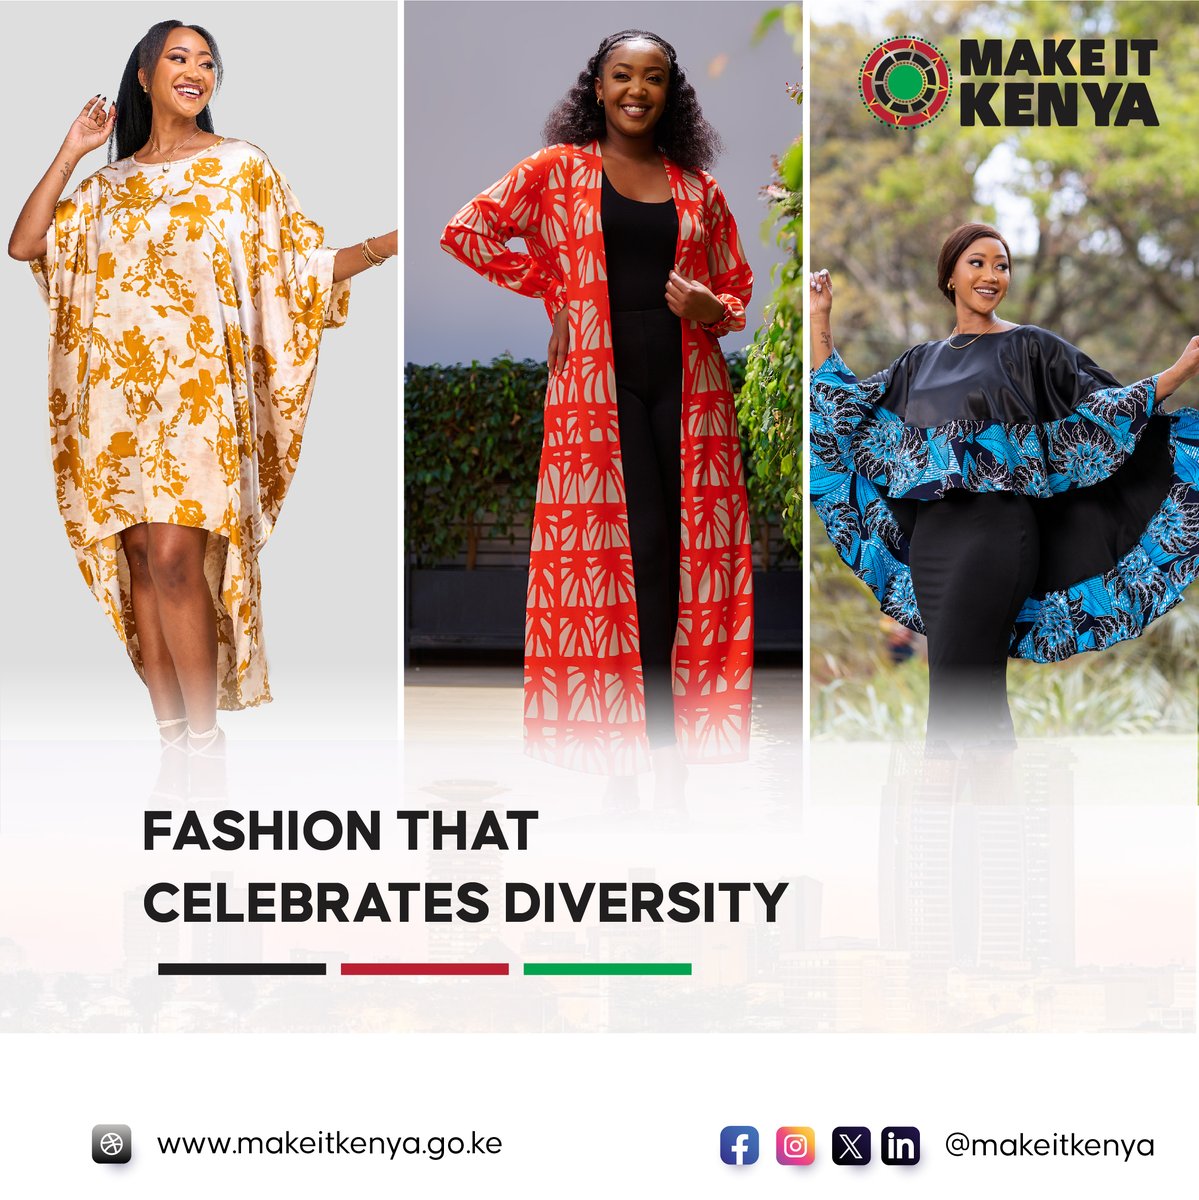 Kenya's textile and apparel sector showcases styles that suit every individual. Which style resonates with you? #KenyanTextile #MadeInKenya